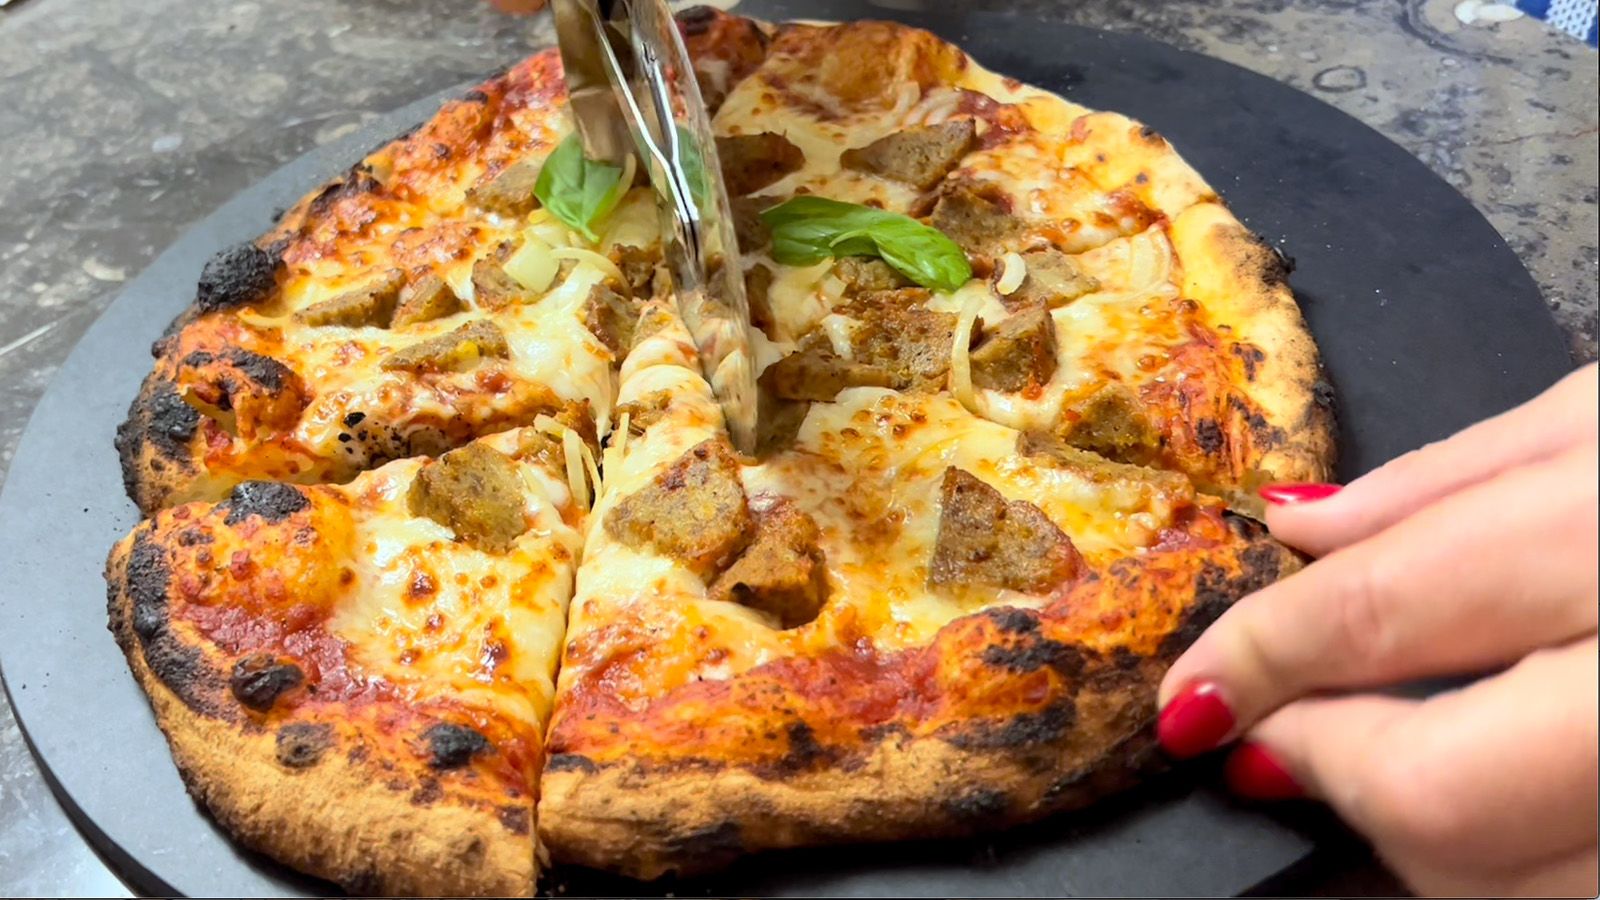 10 inch vs 12 inch Pizza: Which Size Should You Choose?